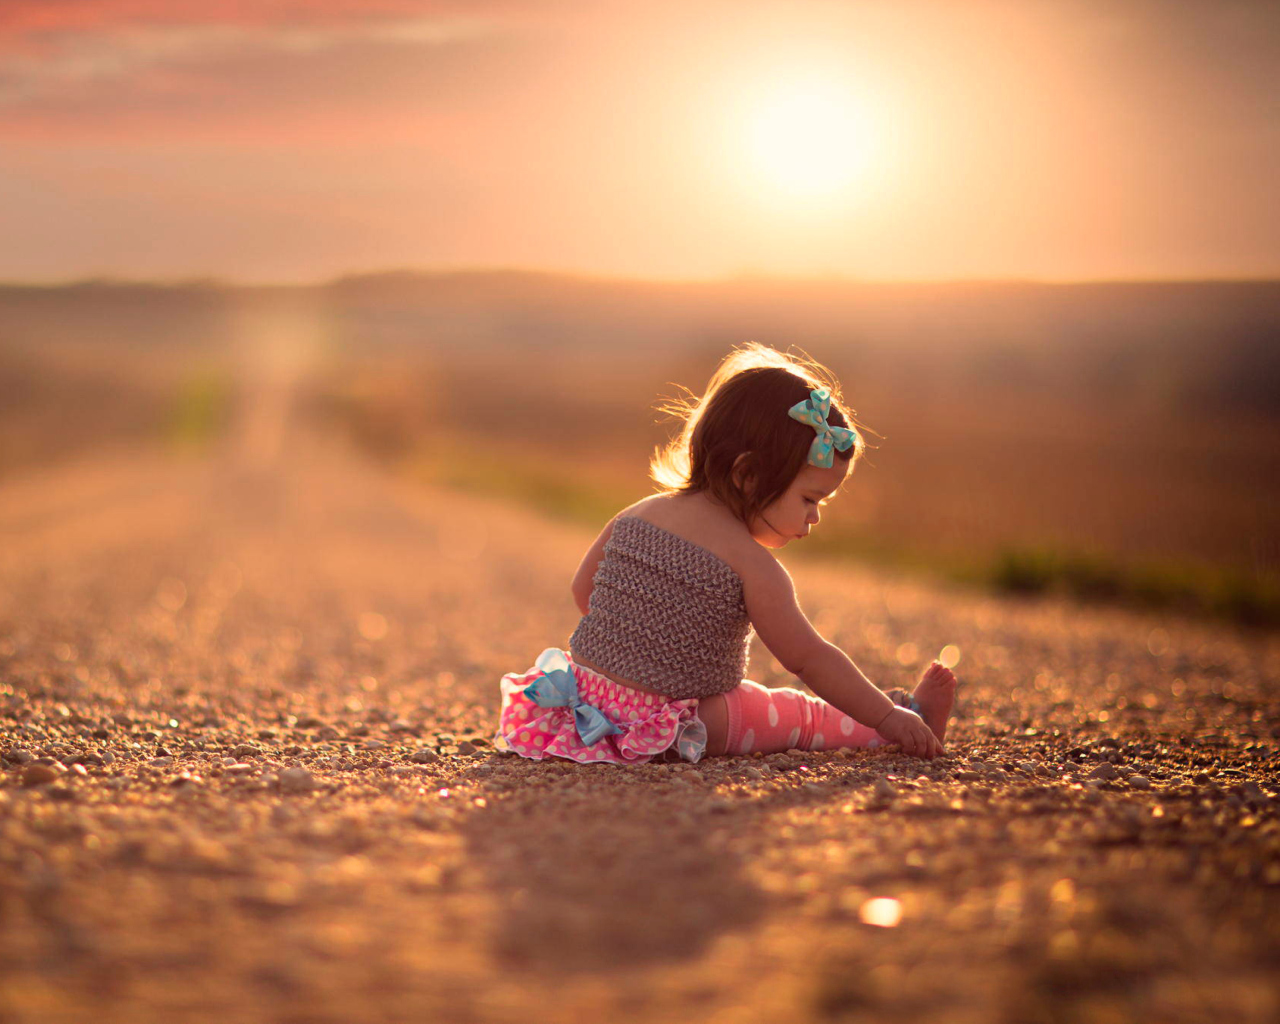 Child On Road At Sunset wallpaper 1280x1024